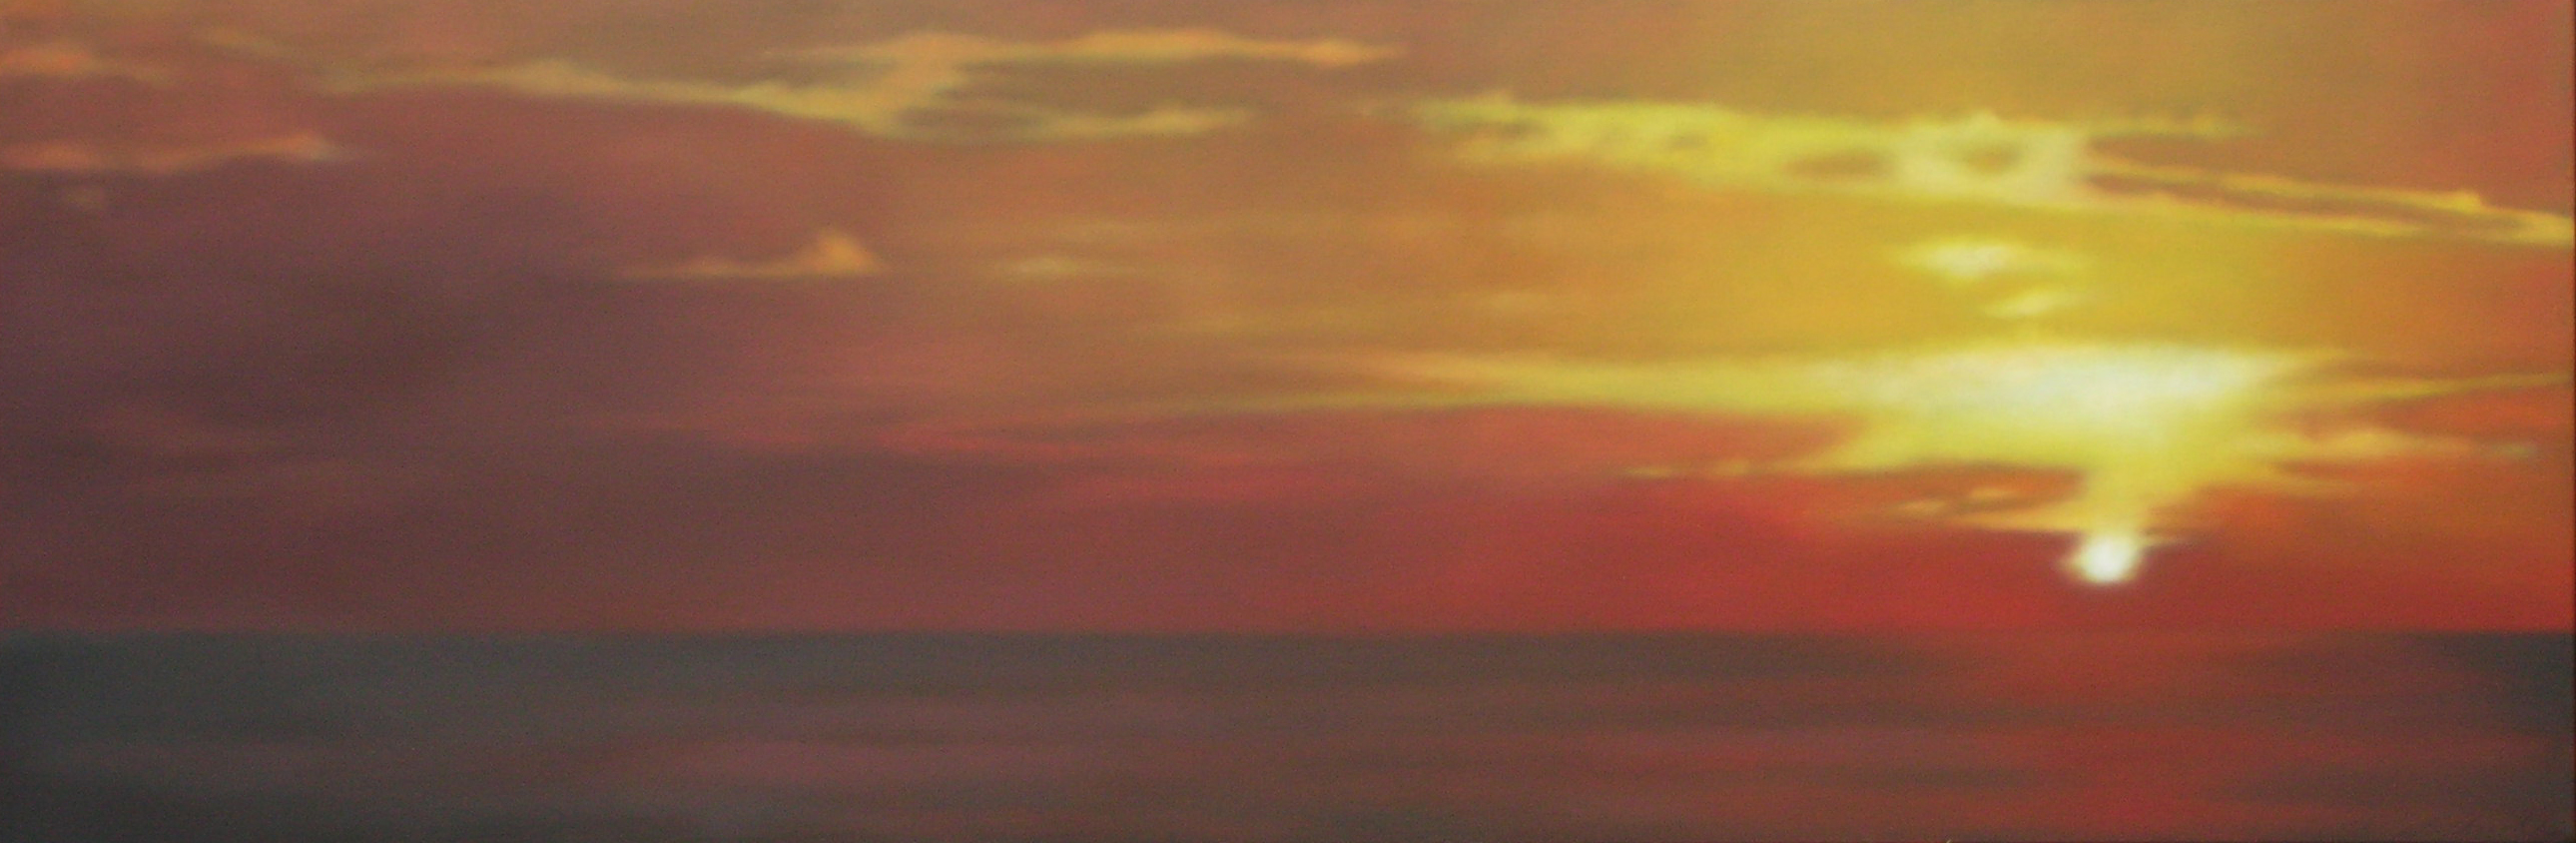 Sunset Sea in Red/Gold, 20"x60", $6,500.